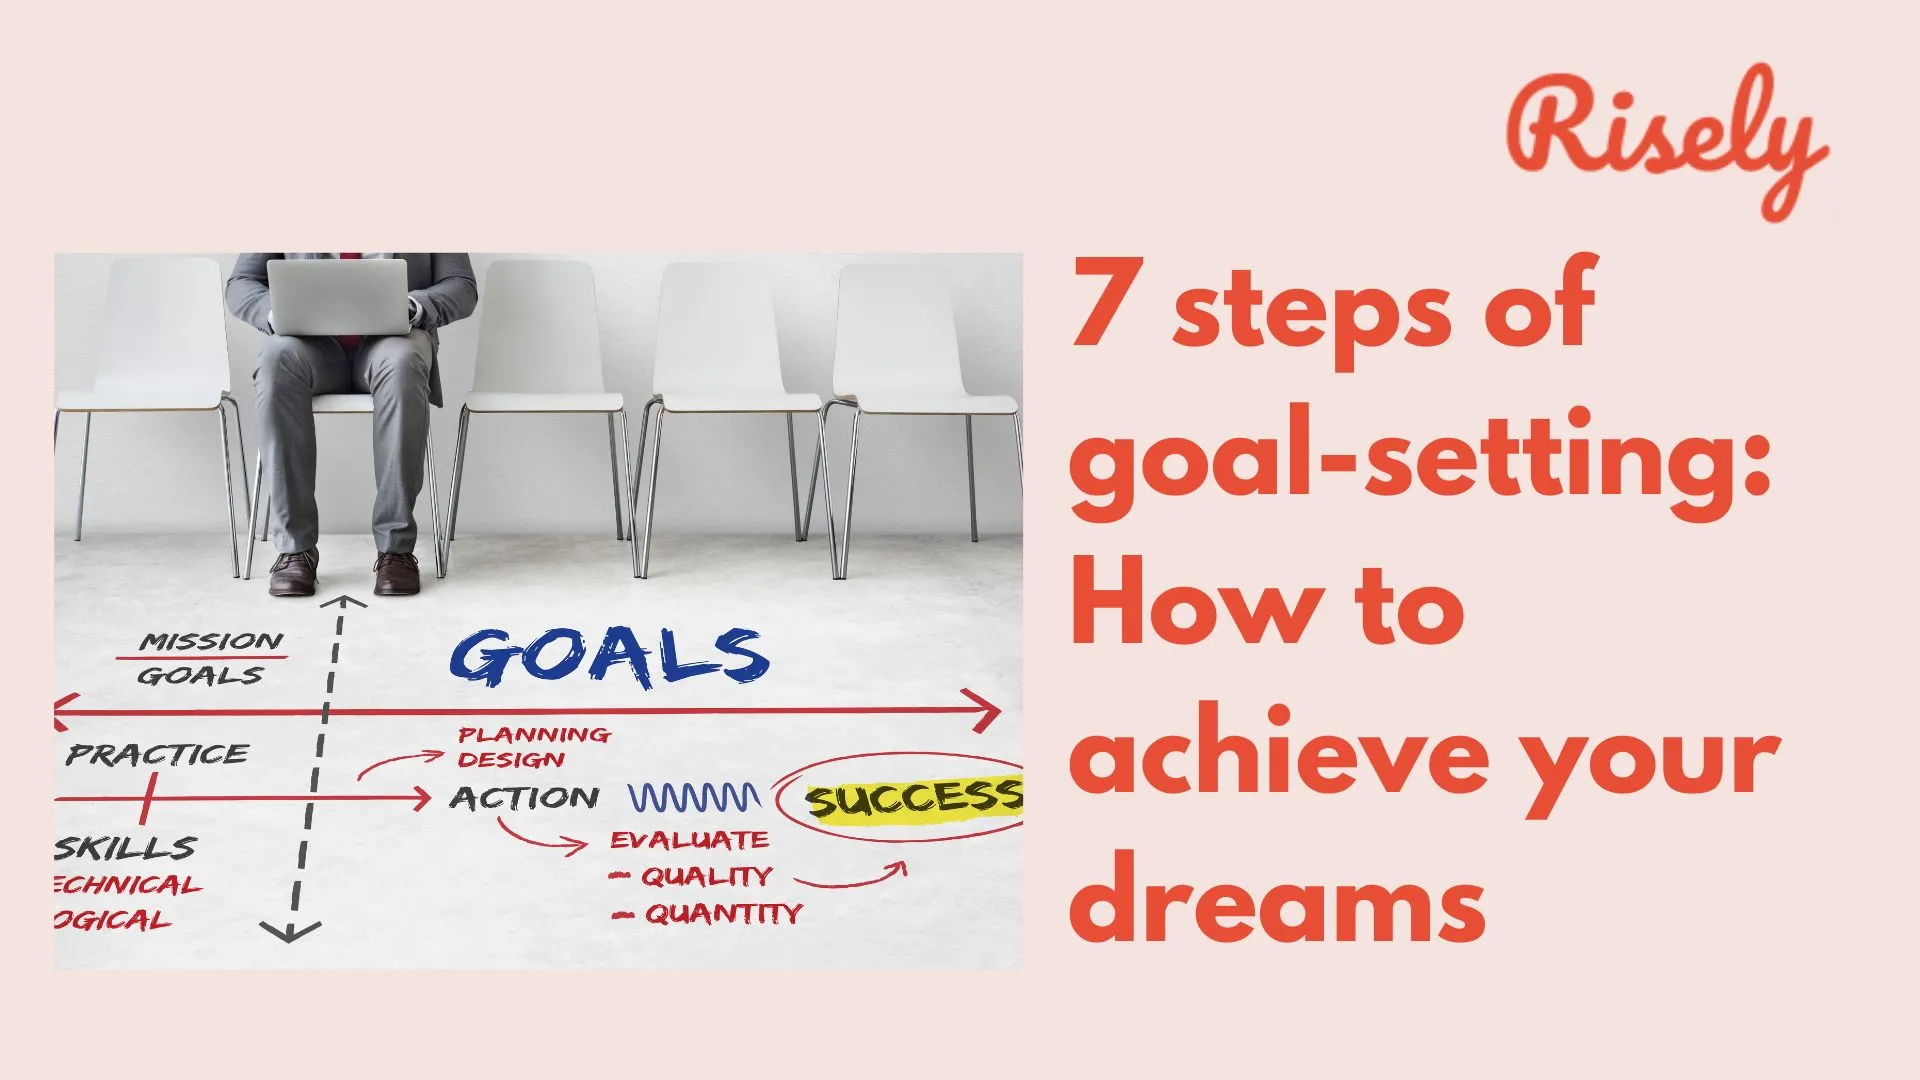 7 steps of goal-setting: How to achieve your dreams